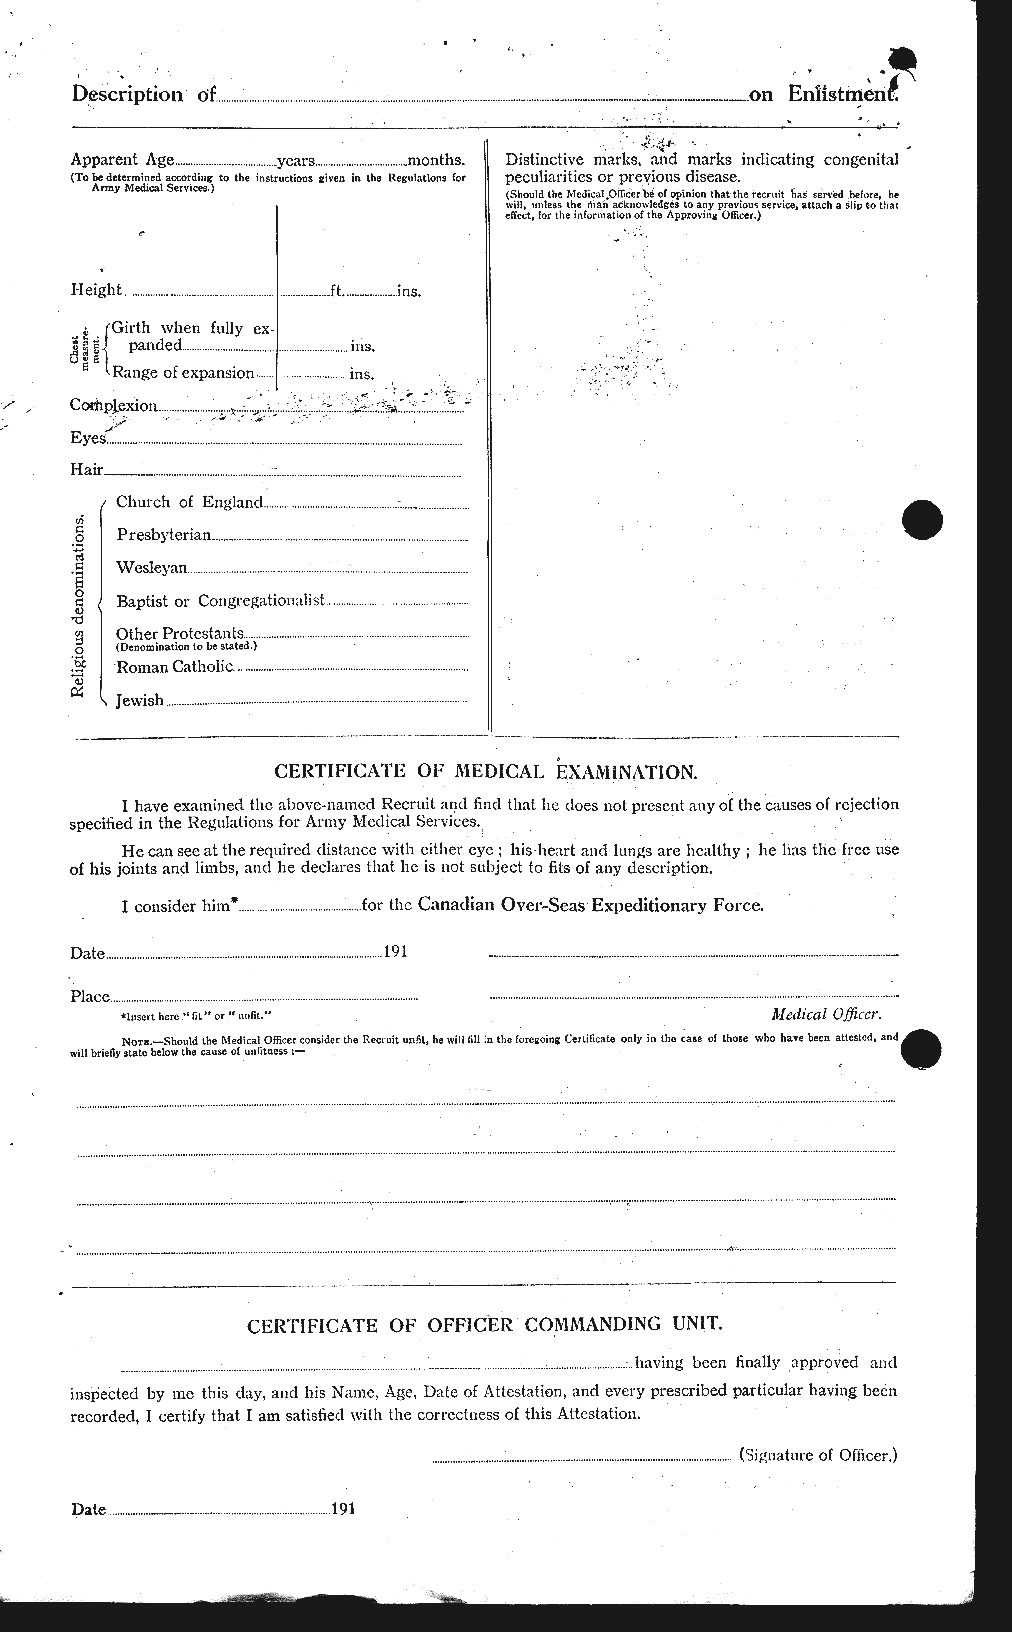 Personnel Records of the First World War - CEF 598047b